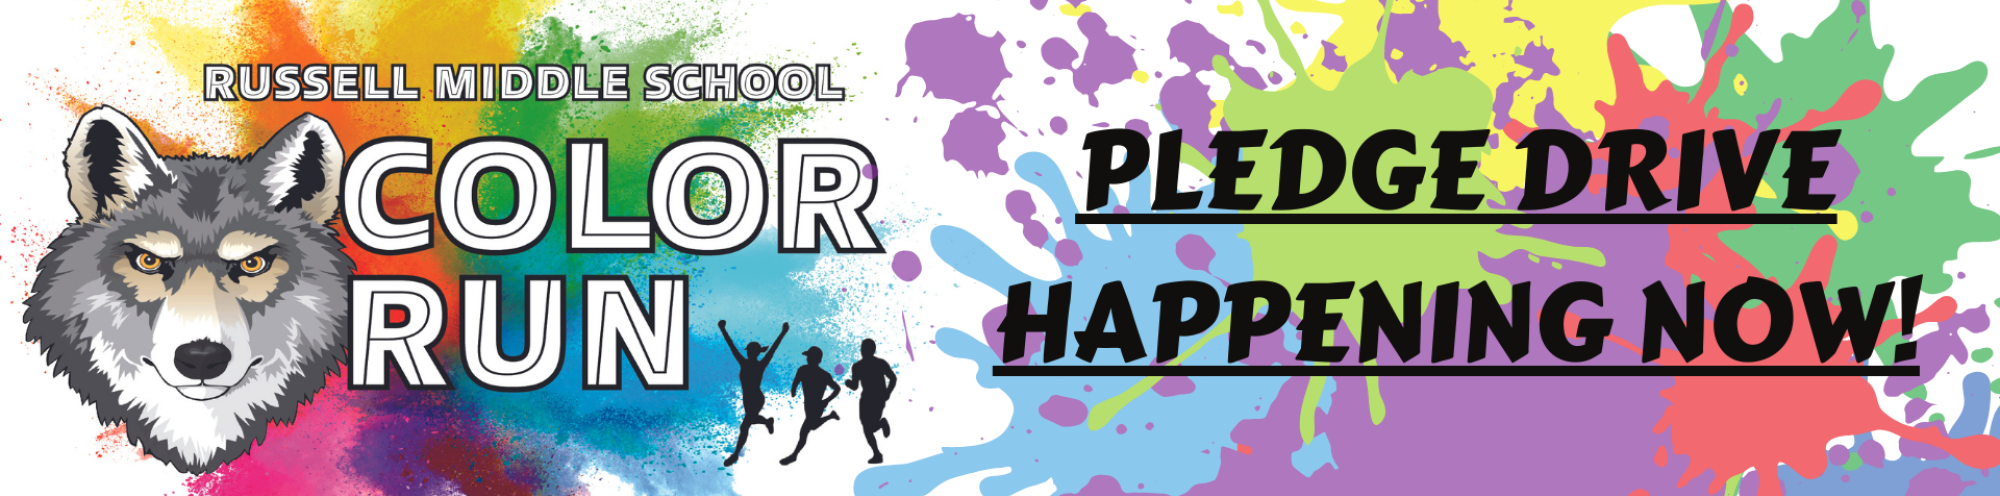 Russell Middle School Color Run Pledge drive happening now